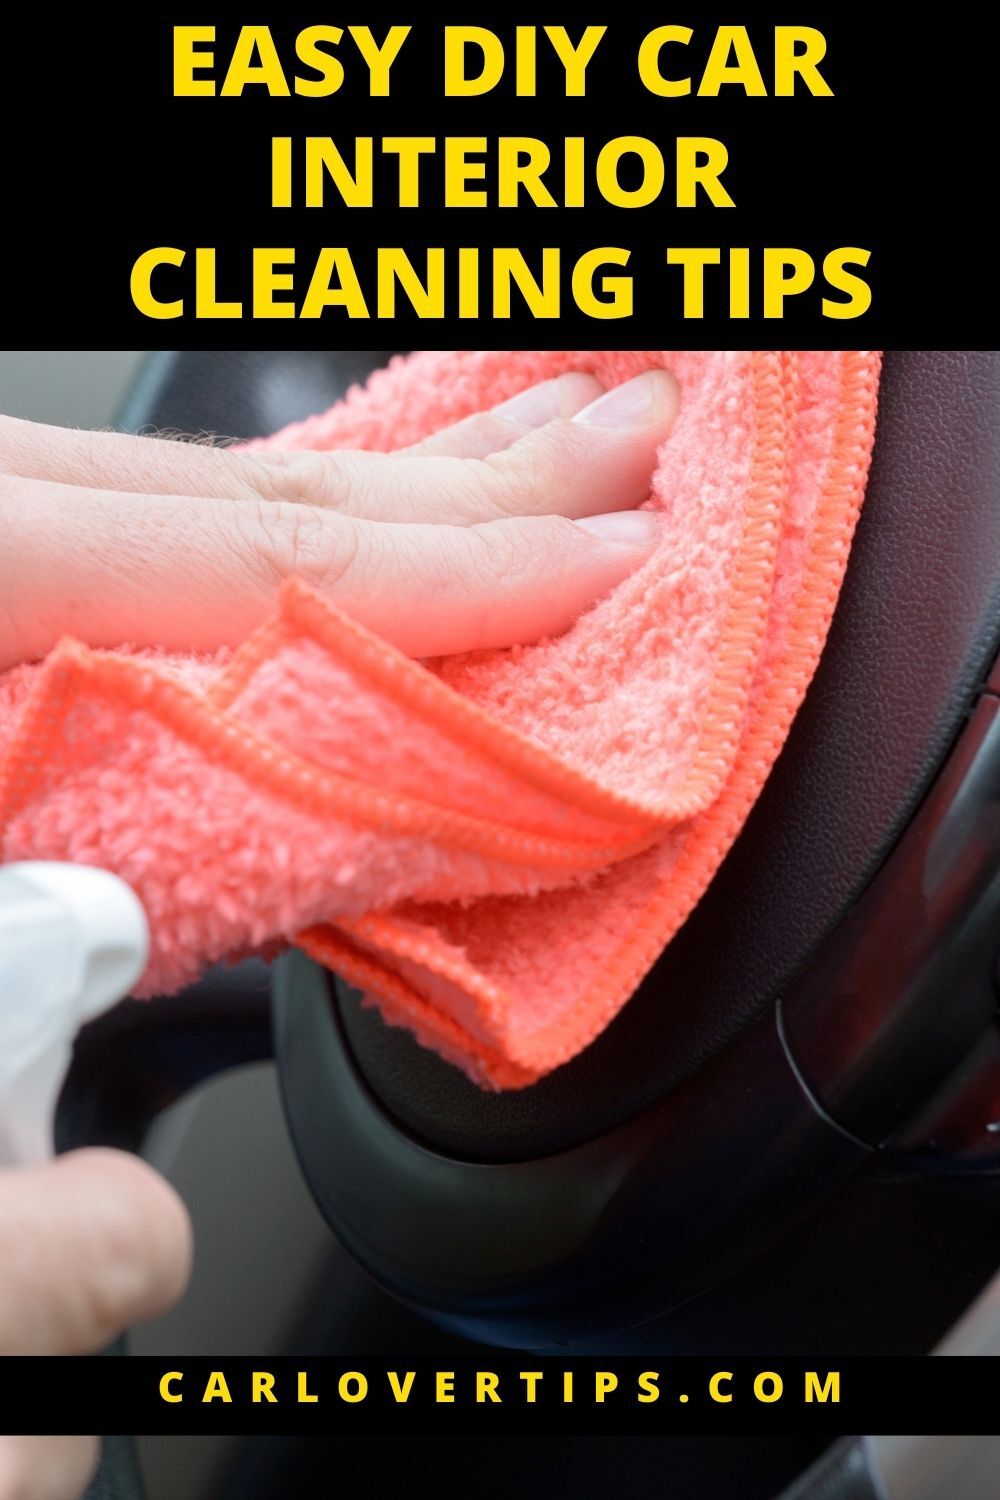 Easy DIY Car Interior Cleaning Tips